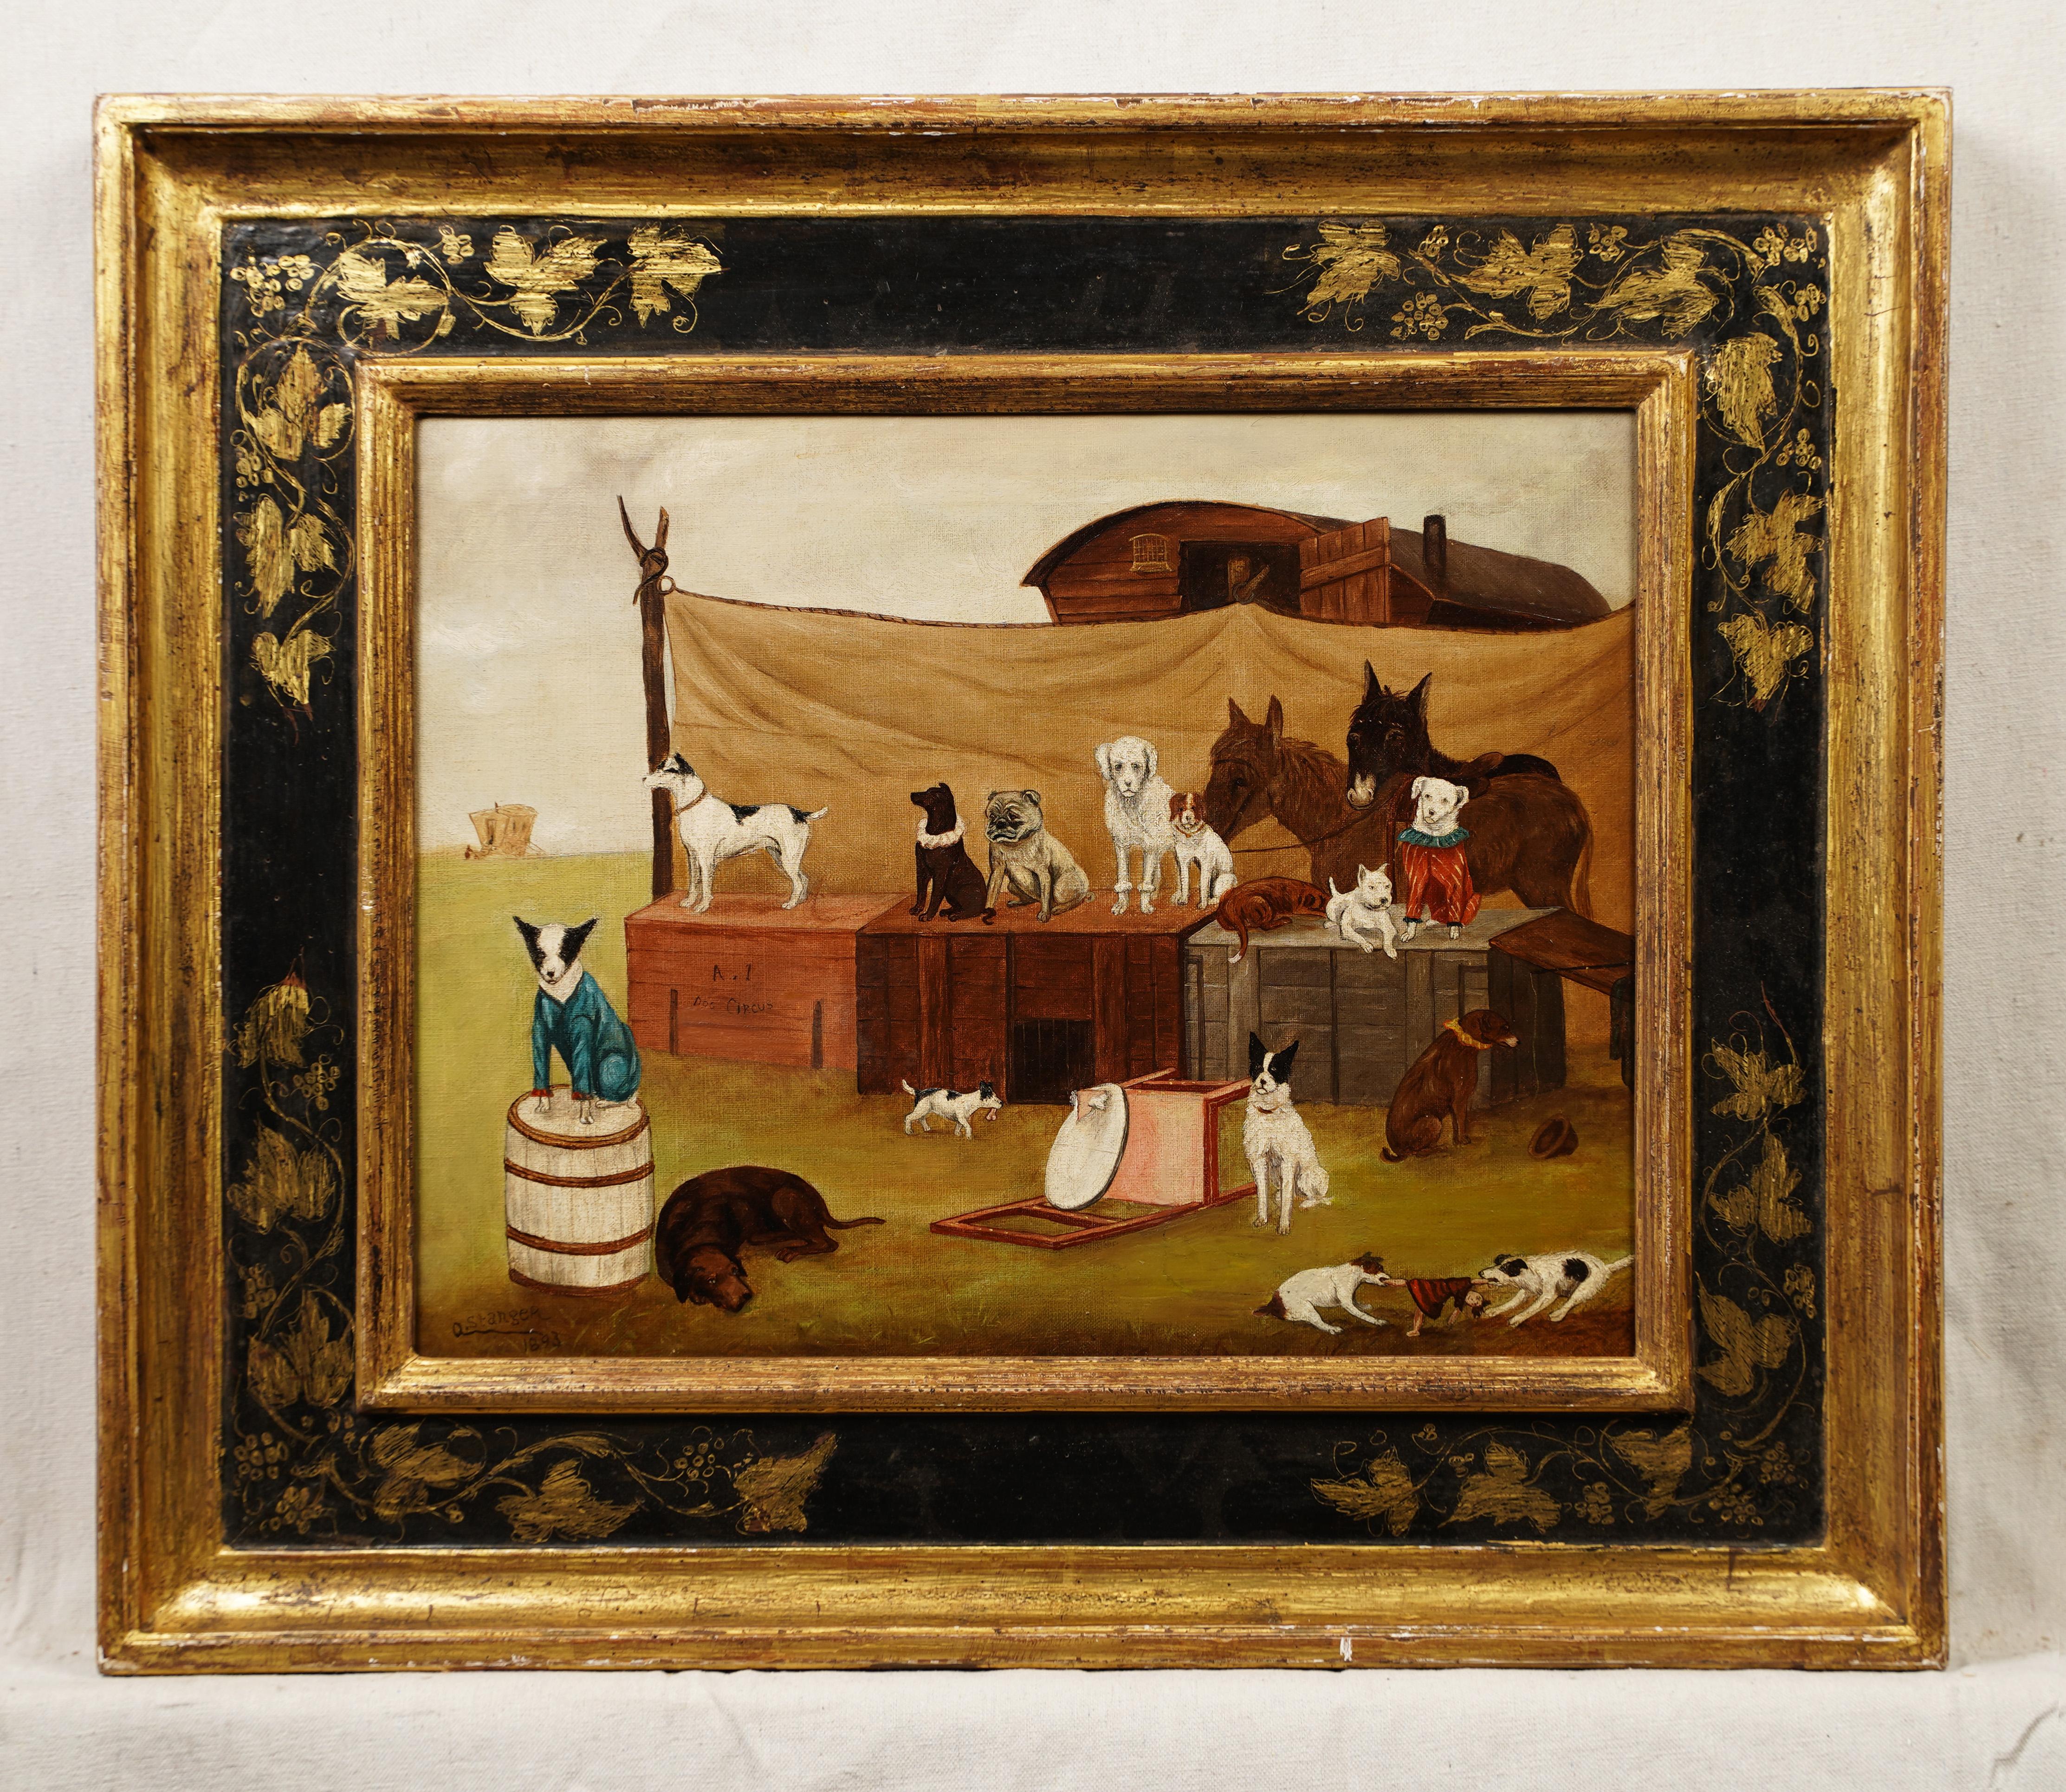 Antique American folk art dog circus oil painting.  Oil on canvas.  Signed.  Framed.  